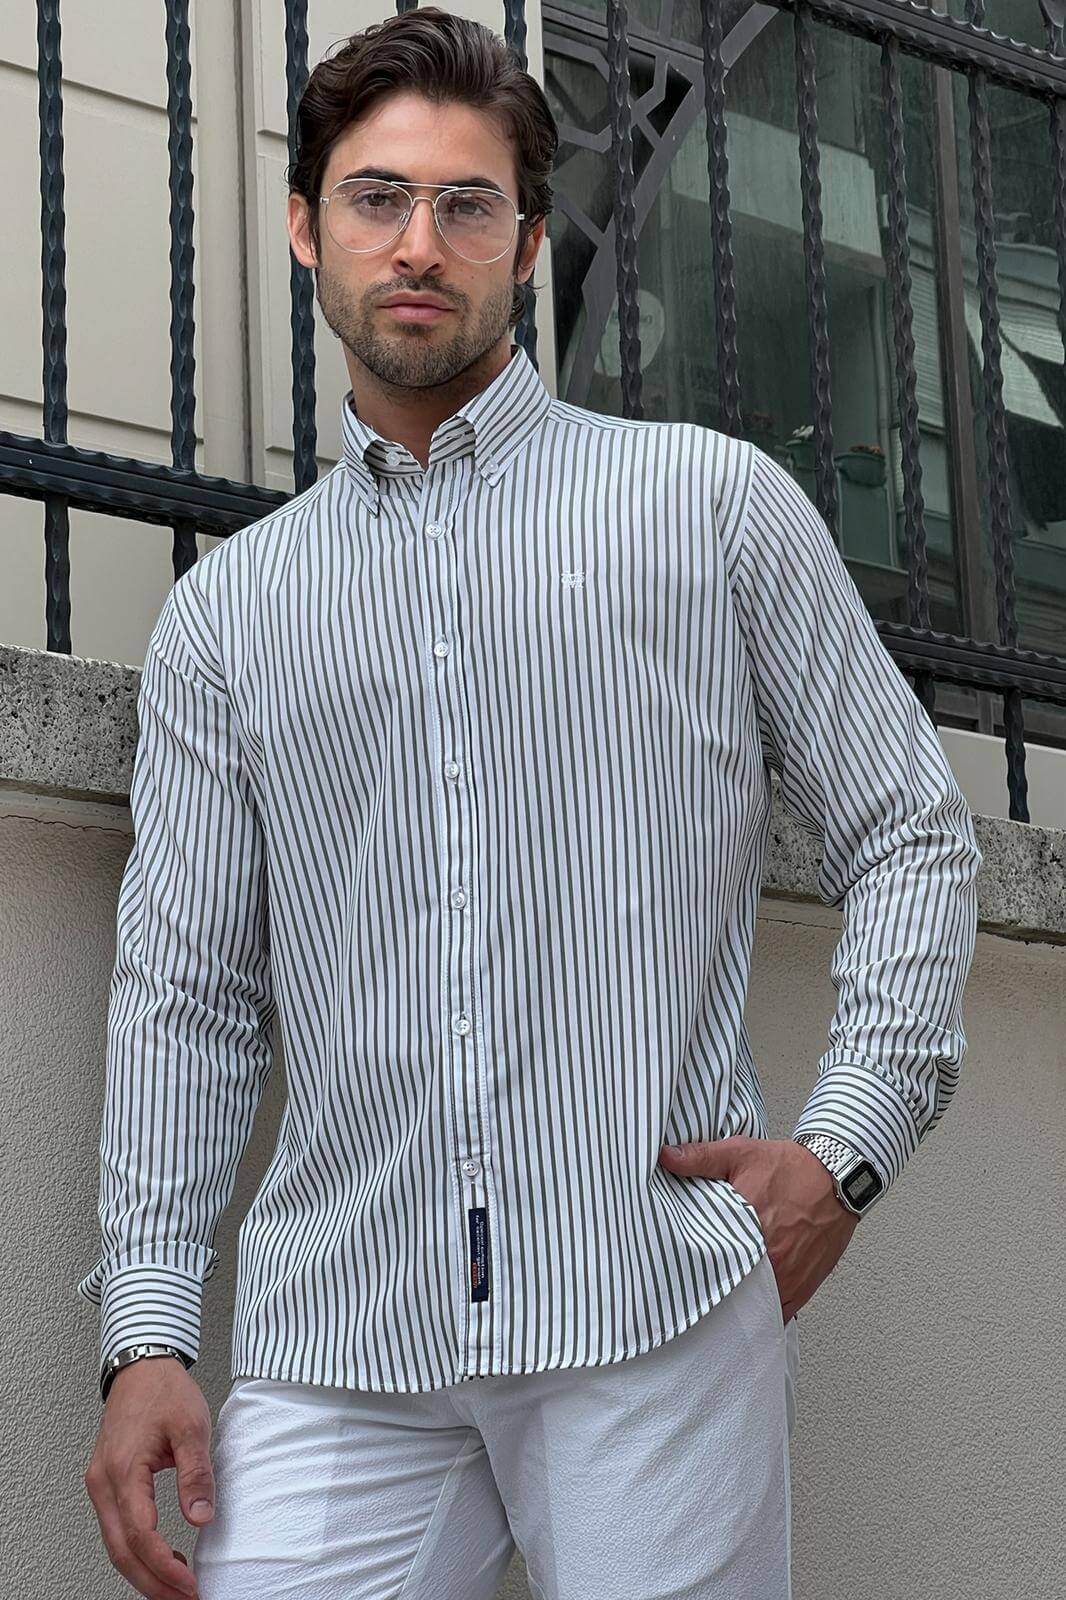 A Slim-Fit Striped White and Green Shirt on display